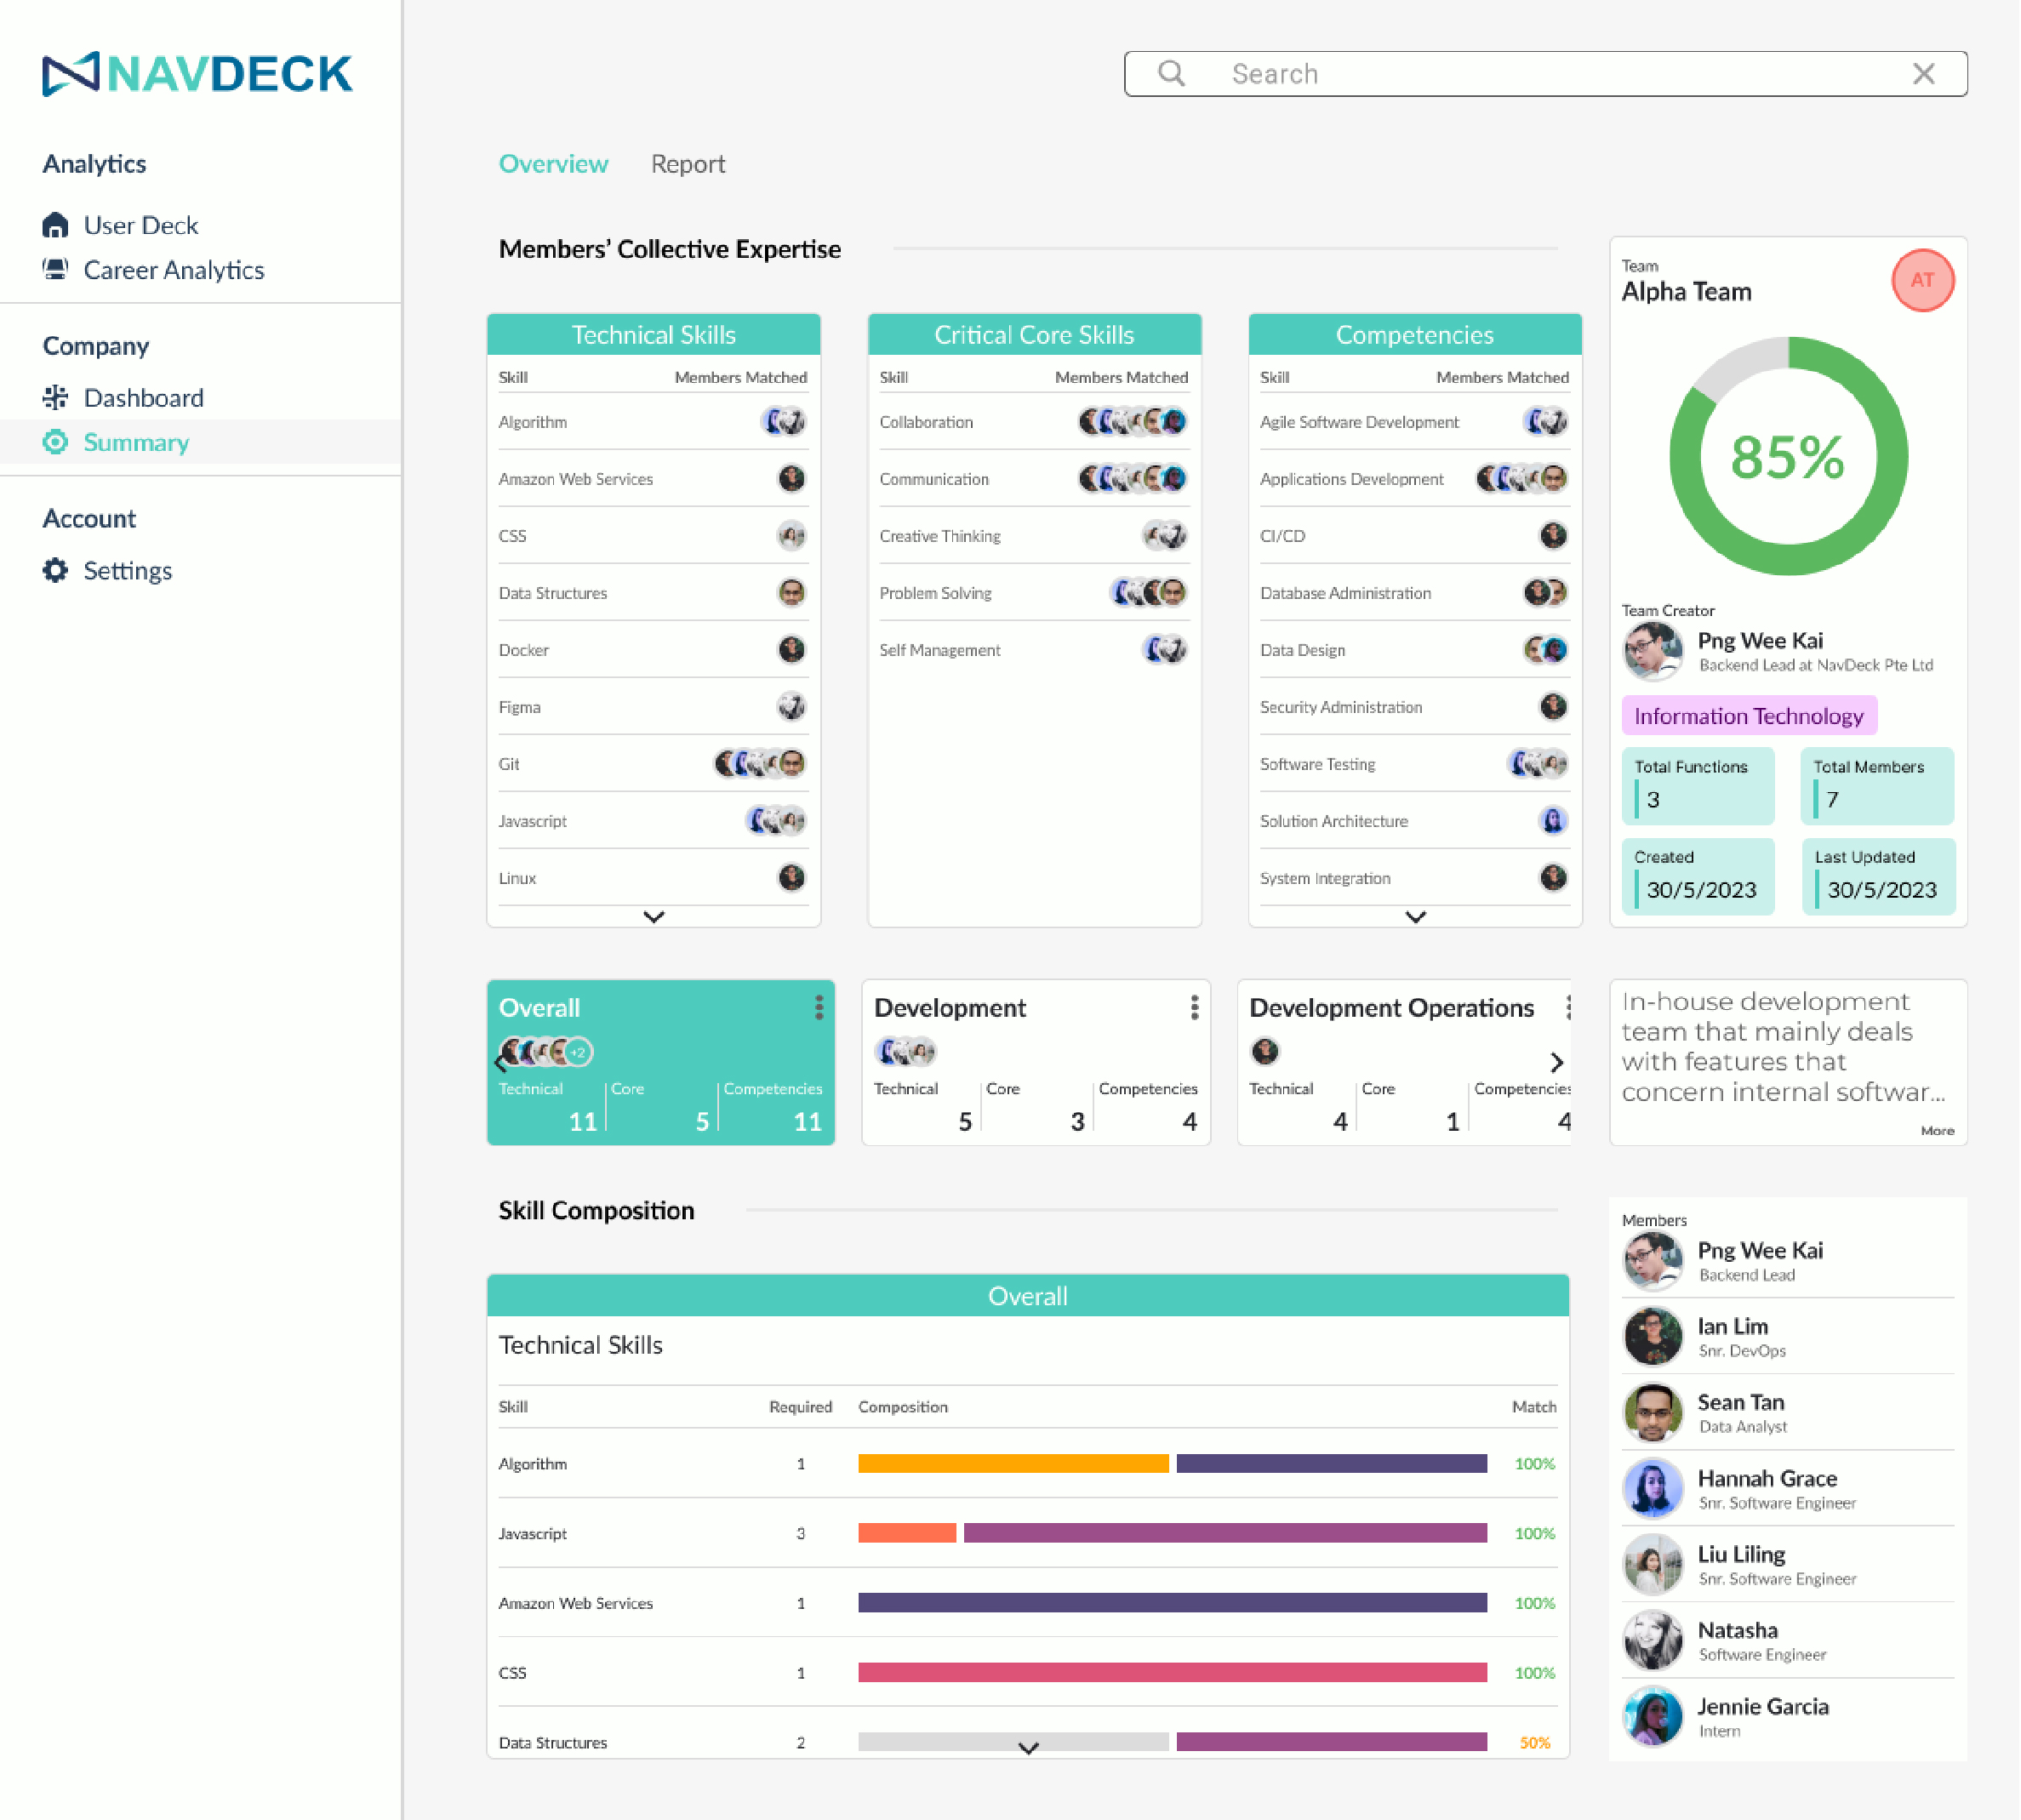 NavDeck AI tool tracking for skills and competencies